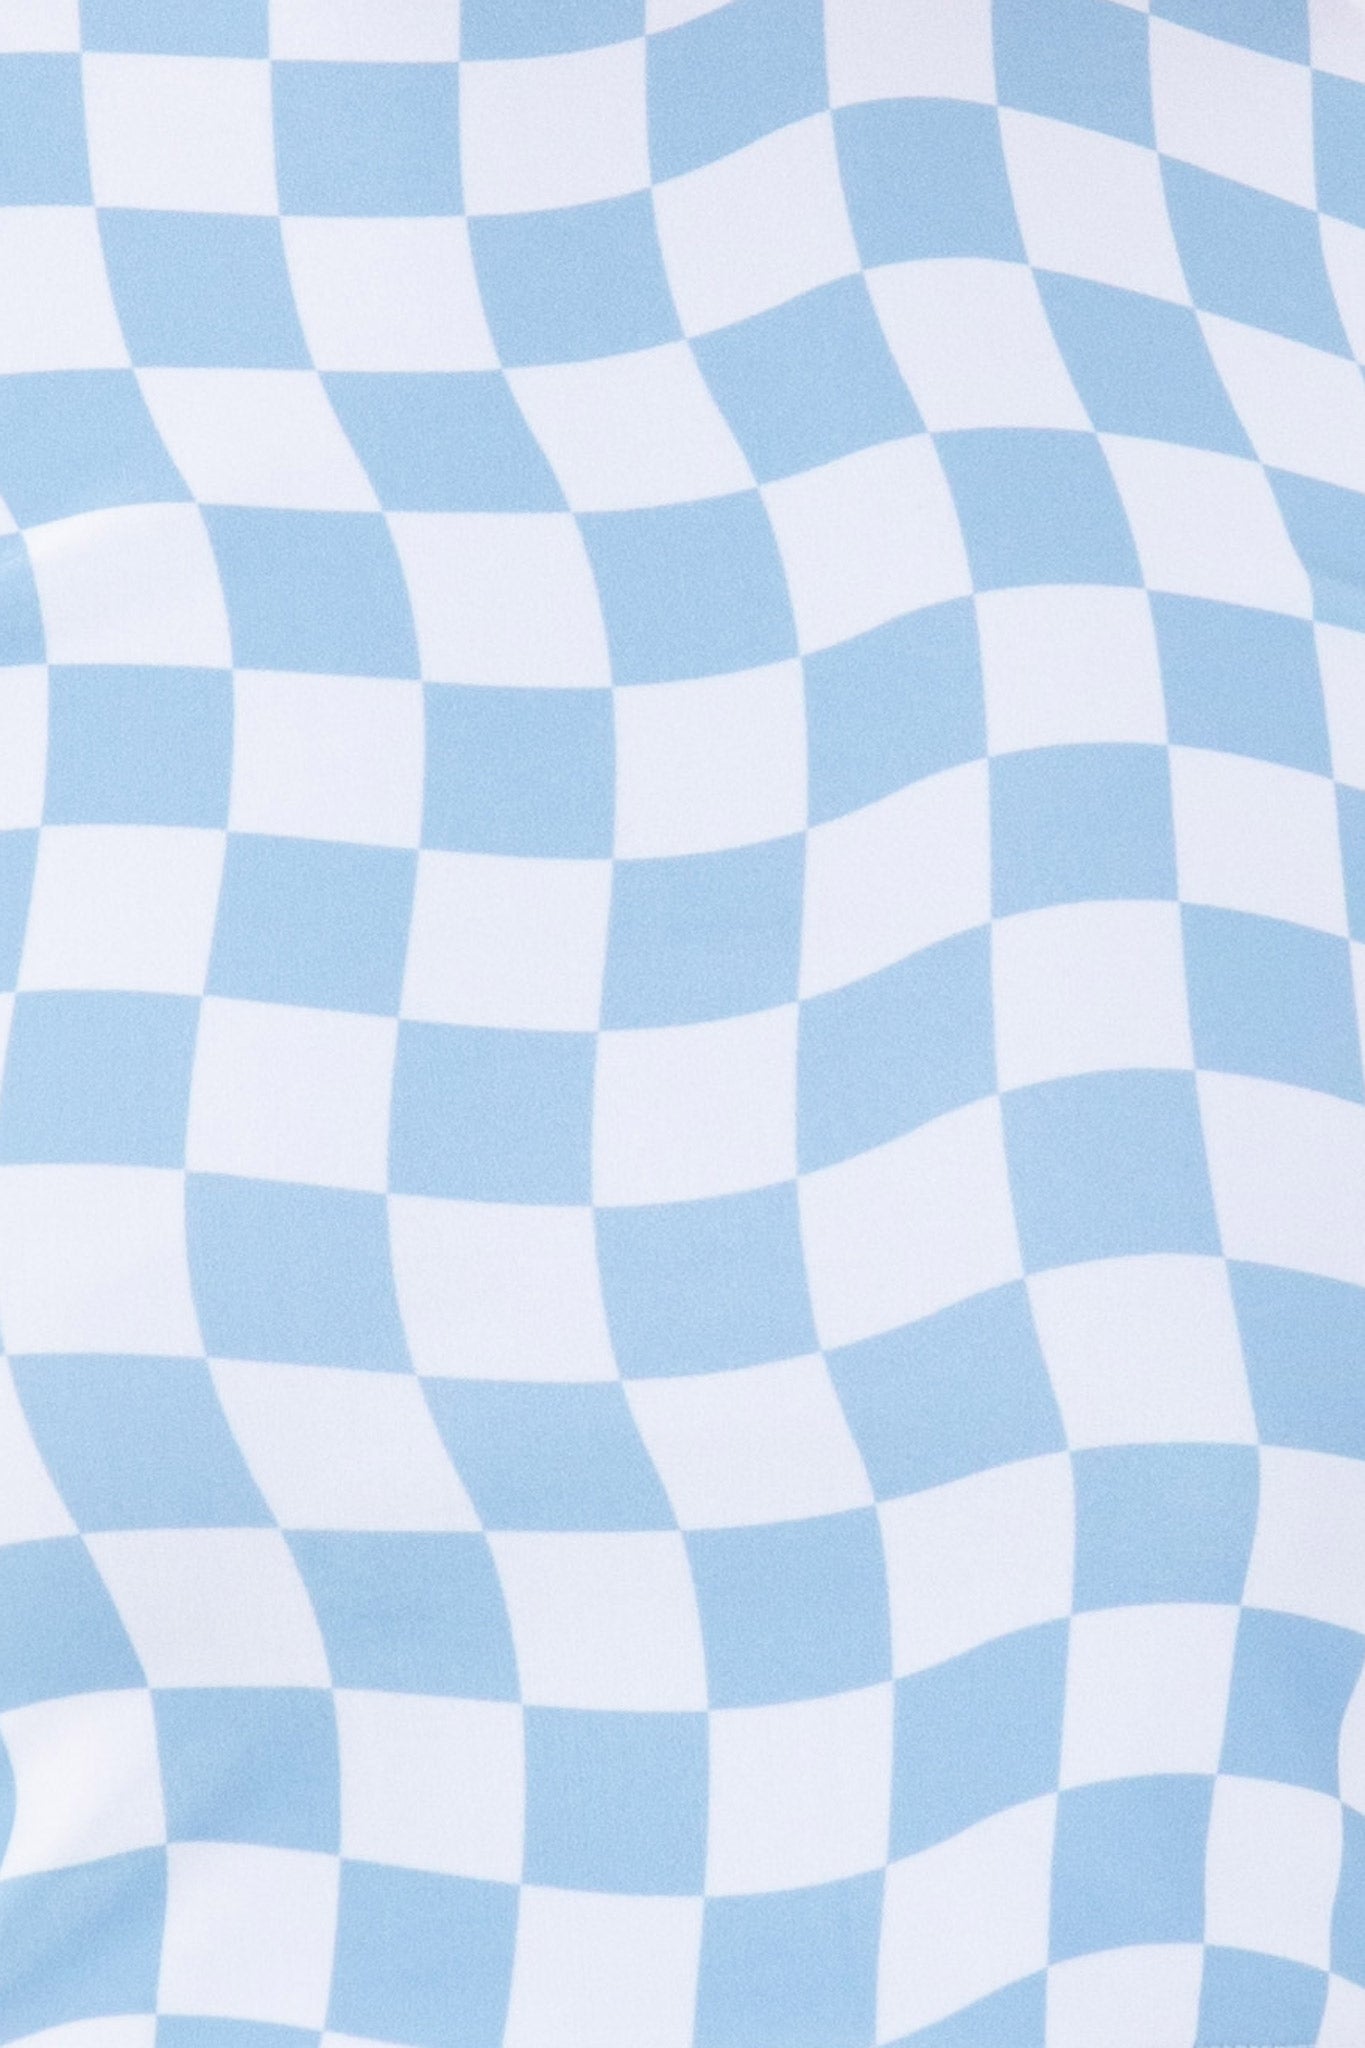 Detailed view of the Putu Boy Short Bottom in blue and white checkered design